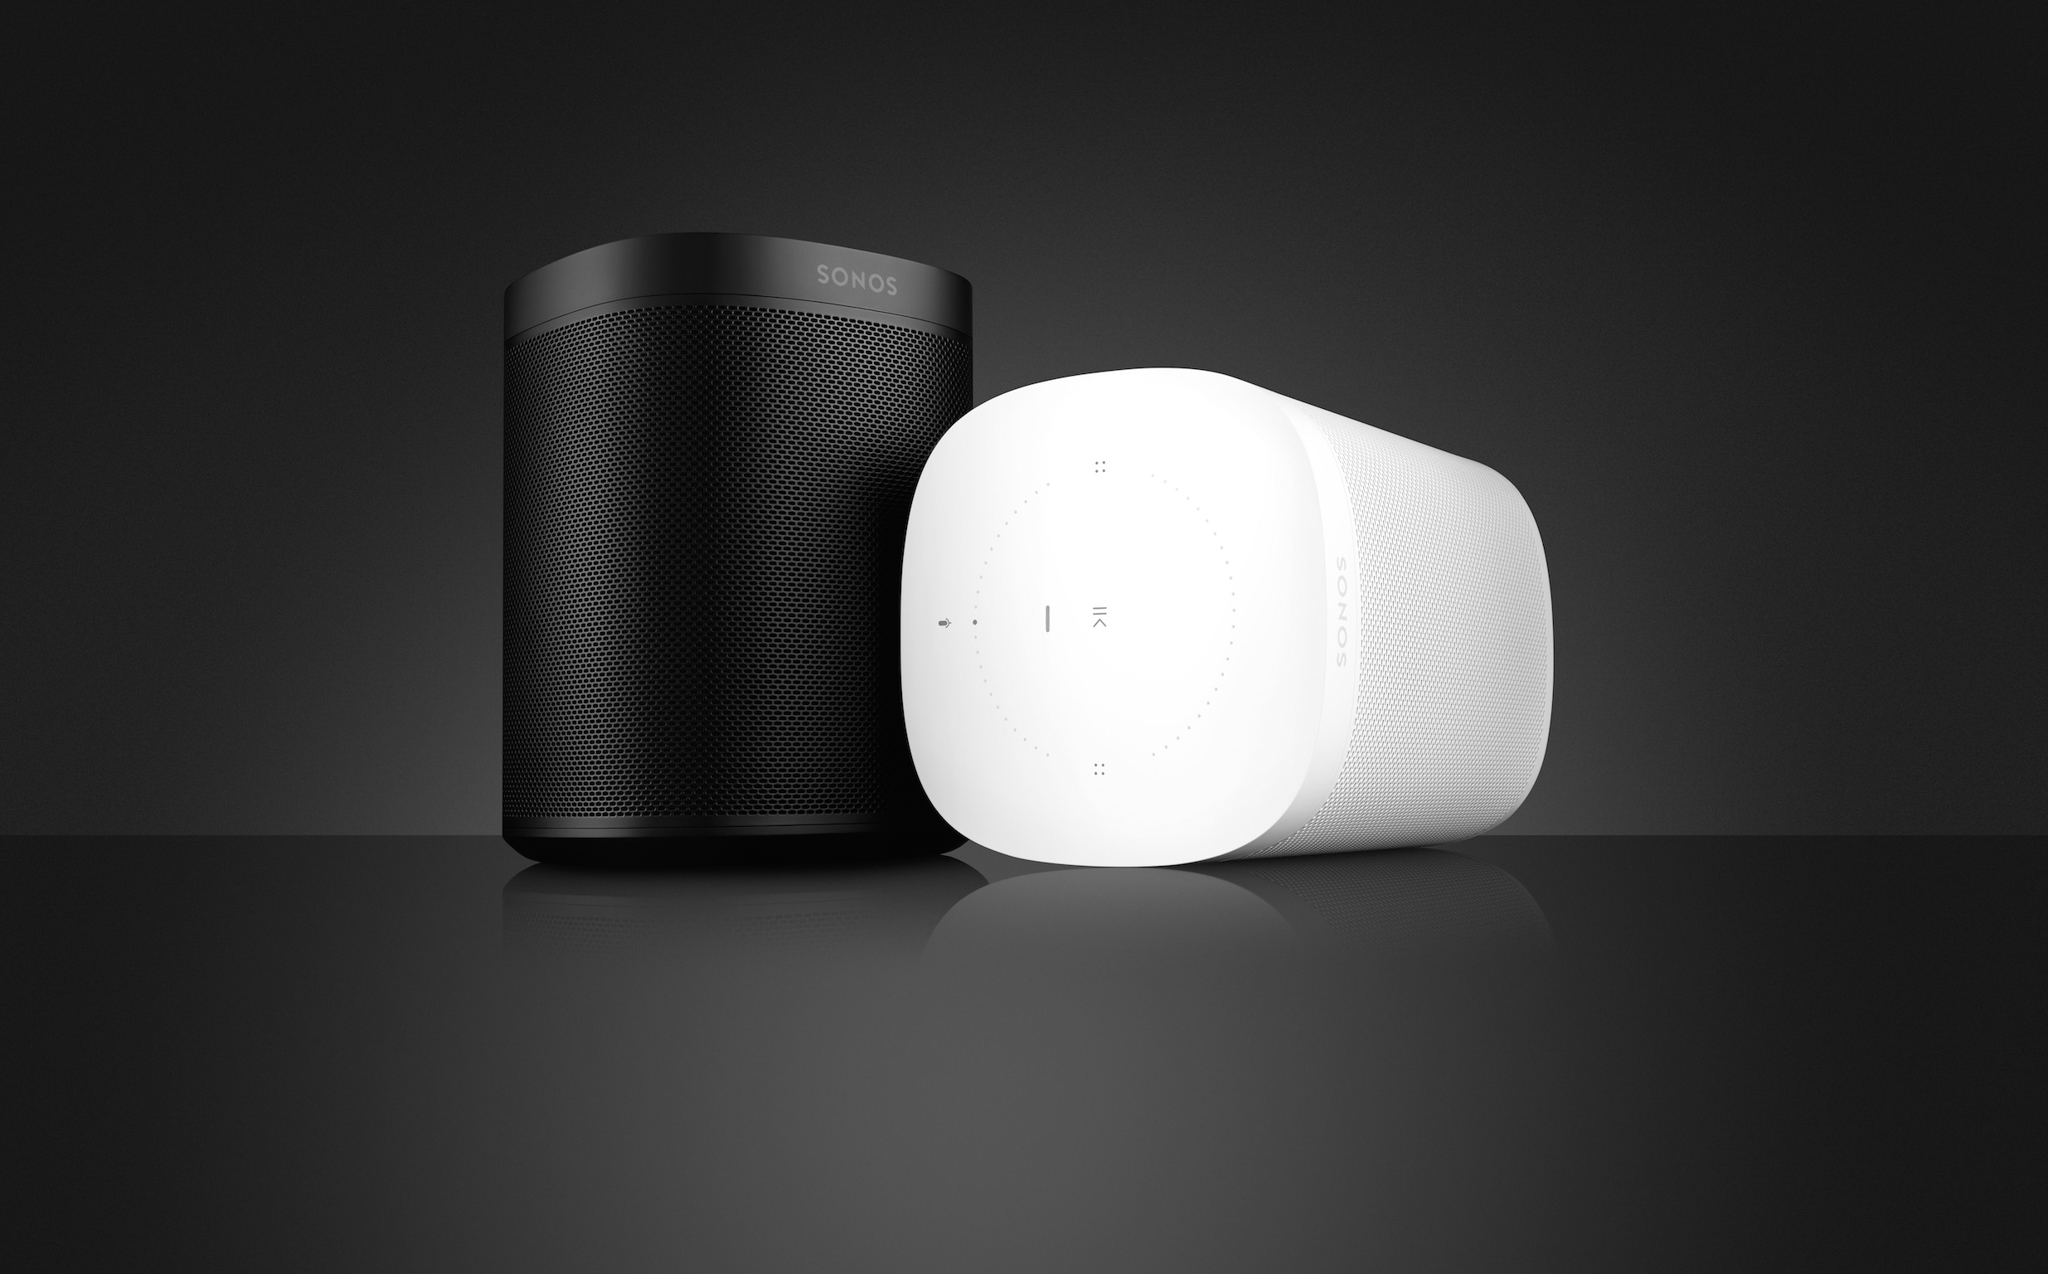 The Sonos One smart speaker includes onboard Amazon Alexa voice activation services and has the same form factor as the Sonos:Play 1 speaker. Image: Sonos